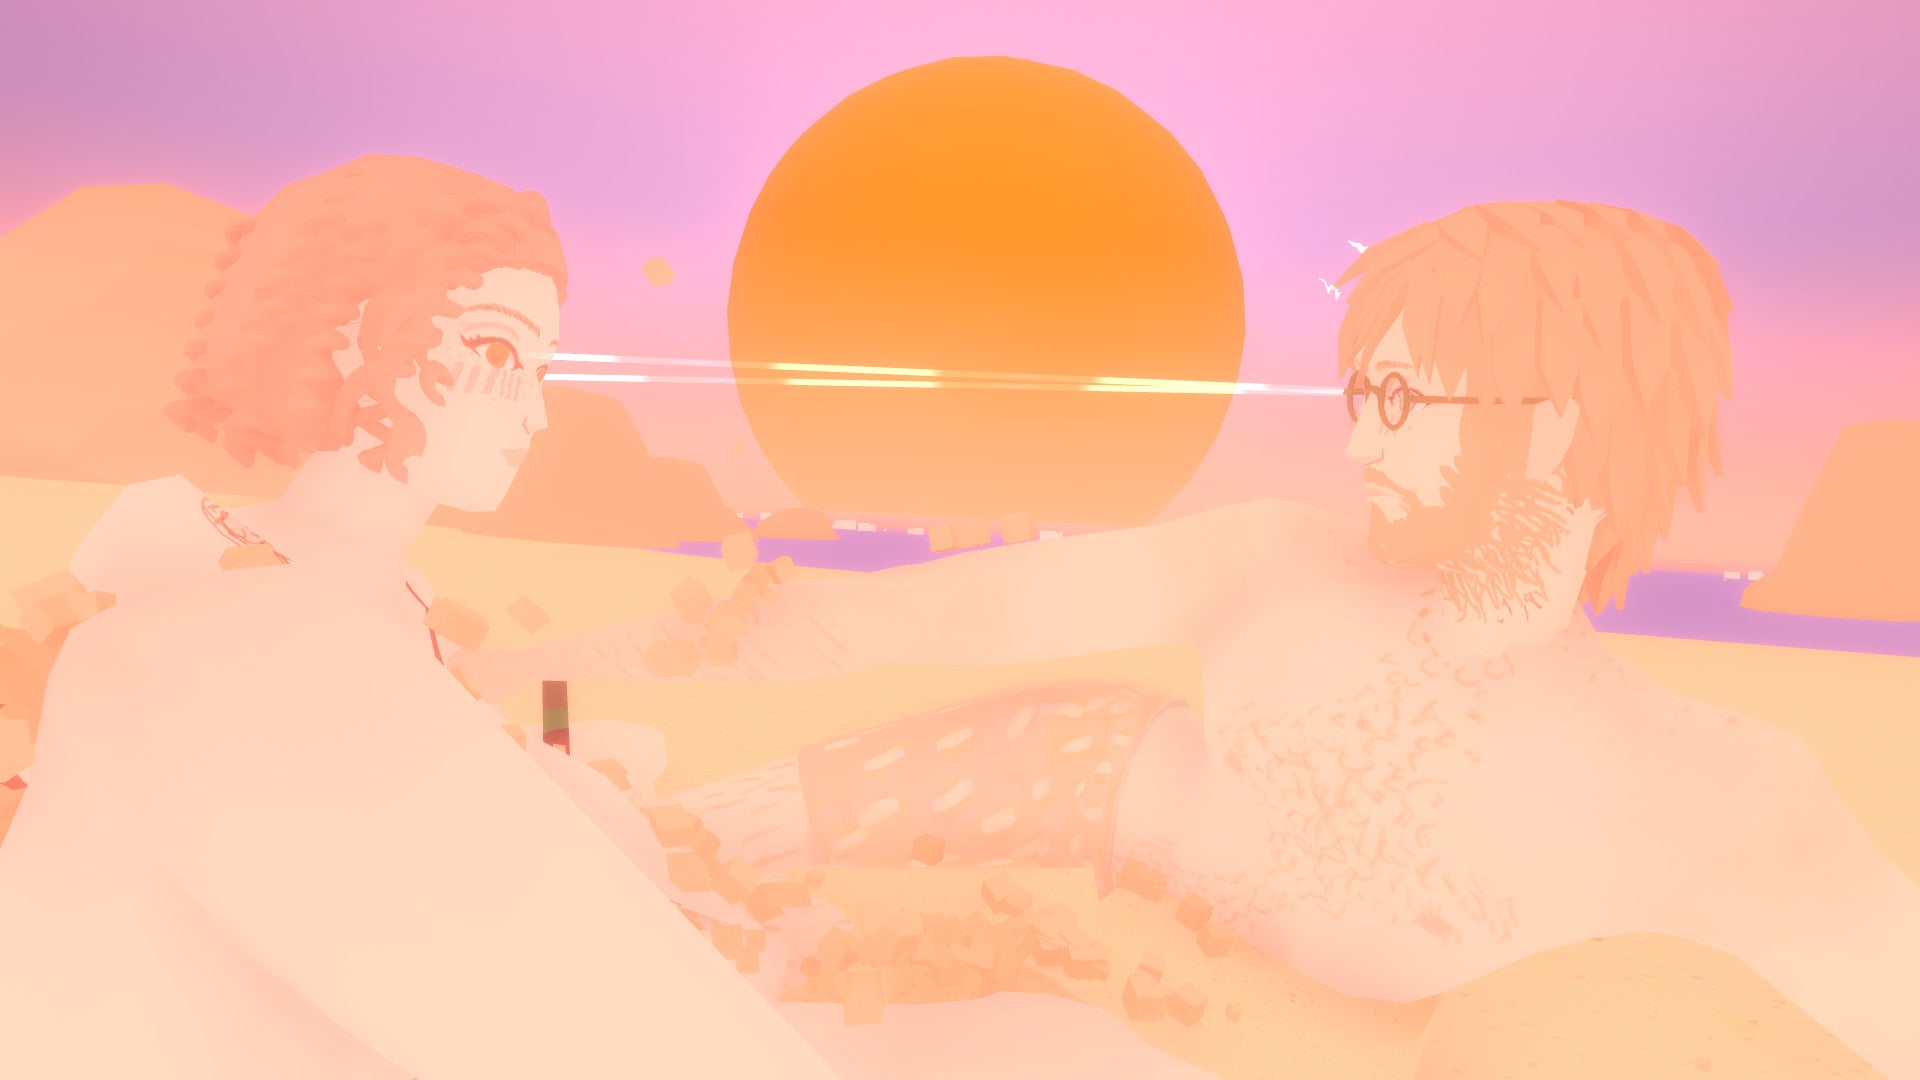 Indie Developer And Her Boyfriend Talk About Making A Game About Their Relationship